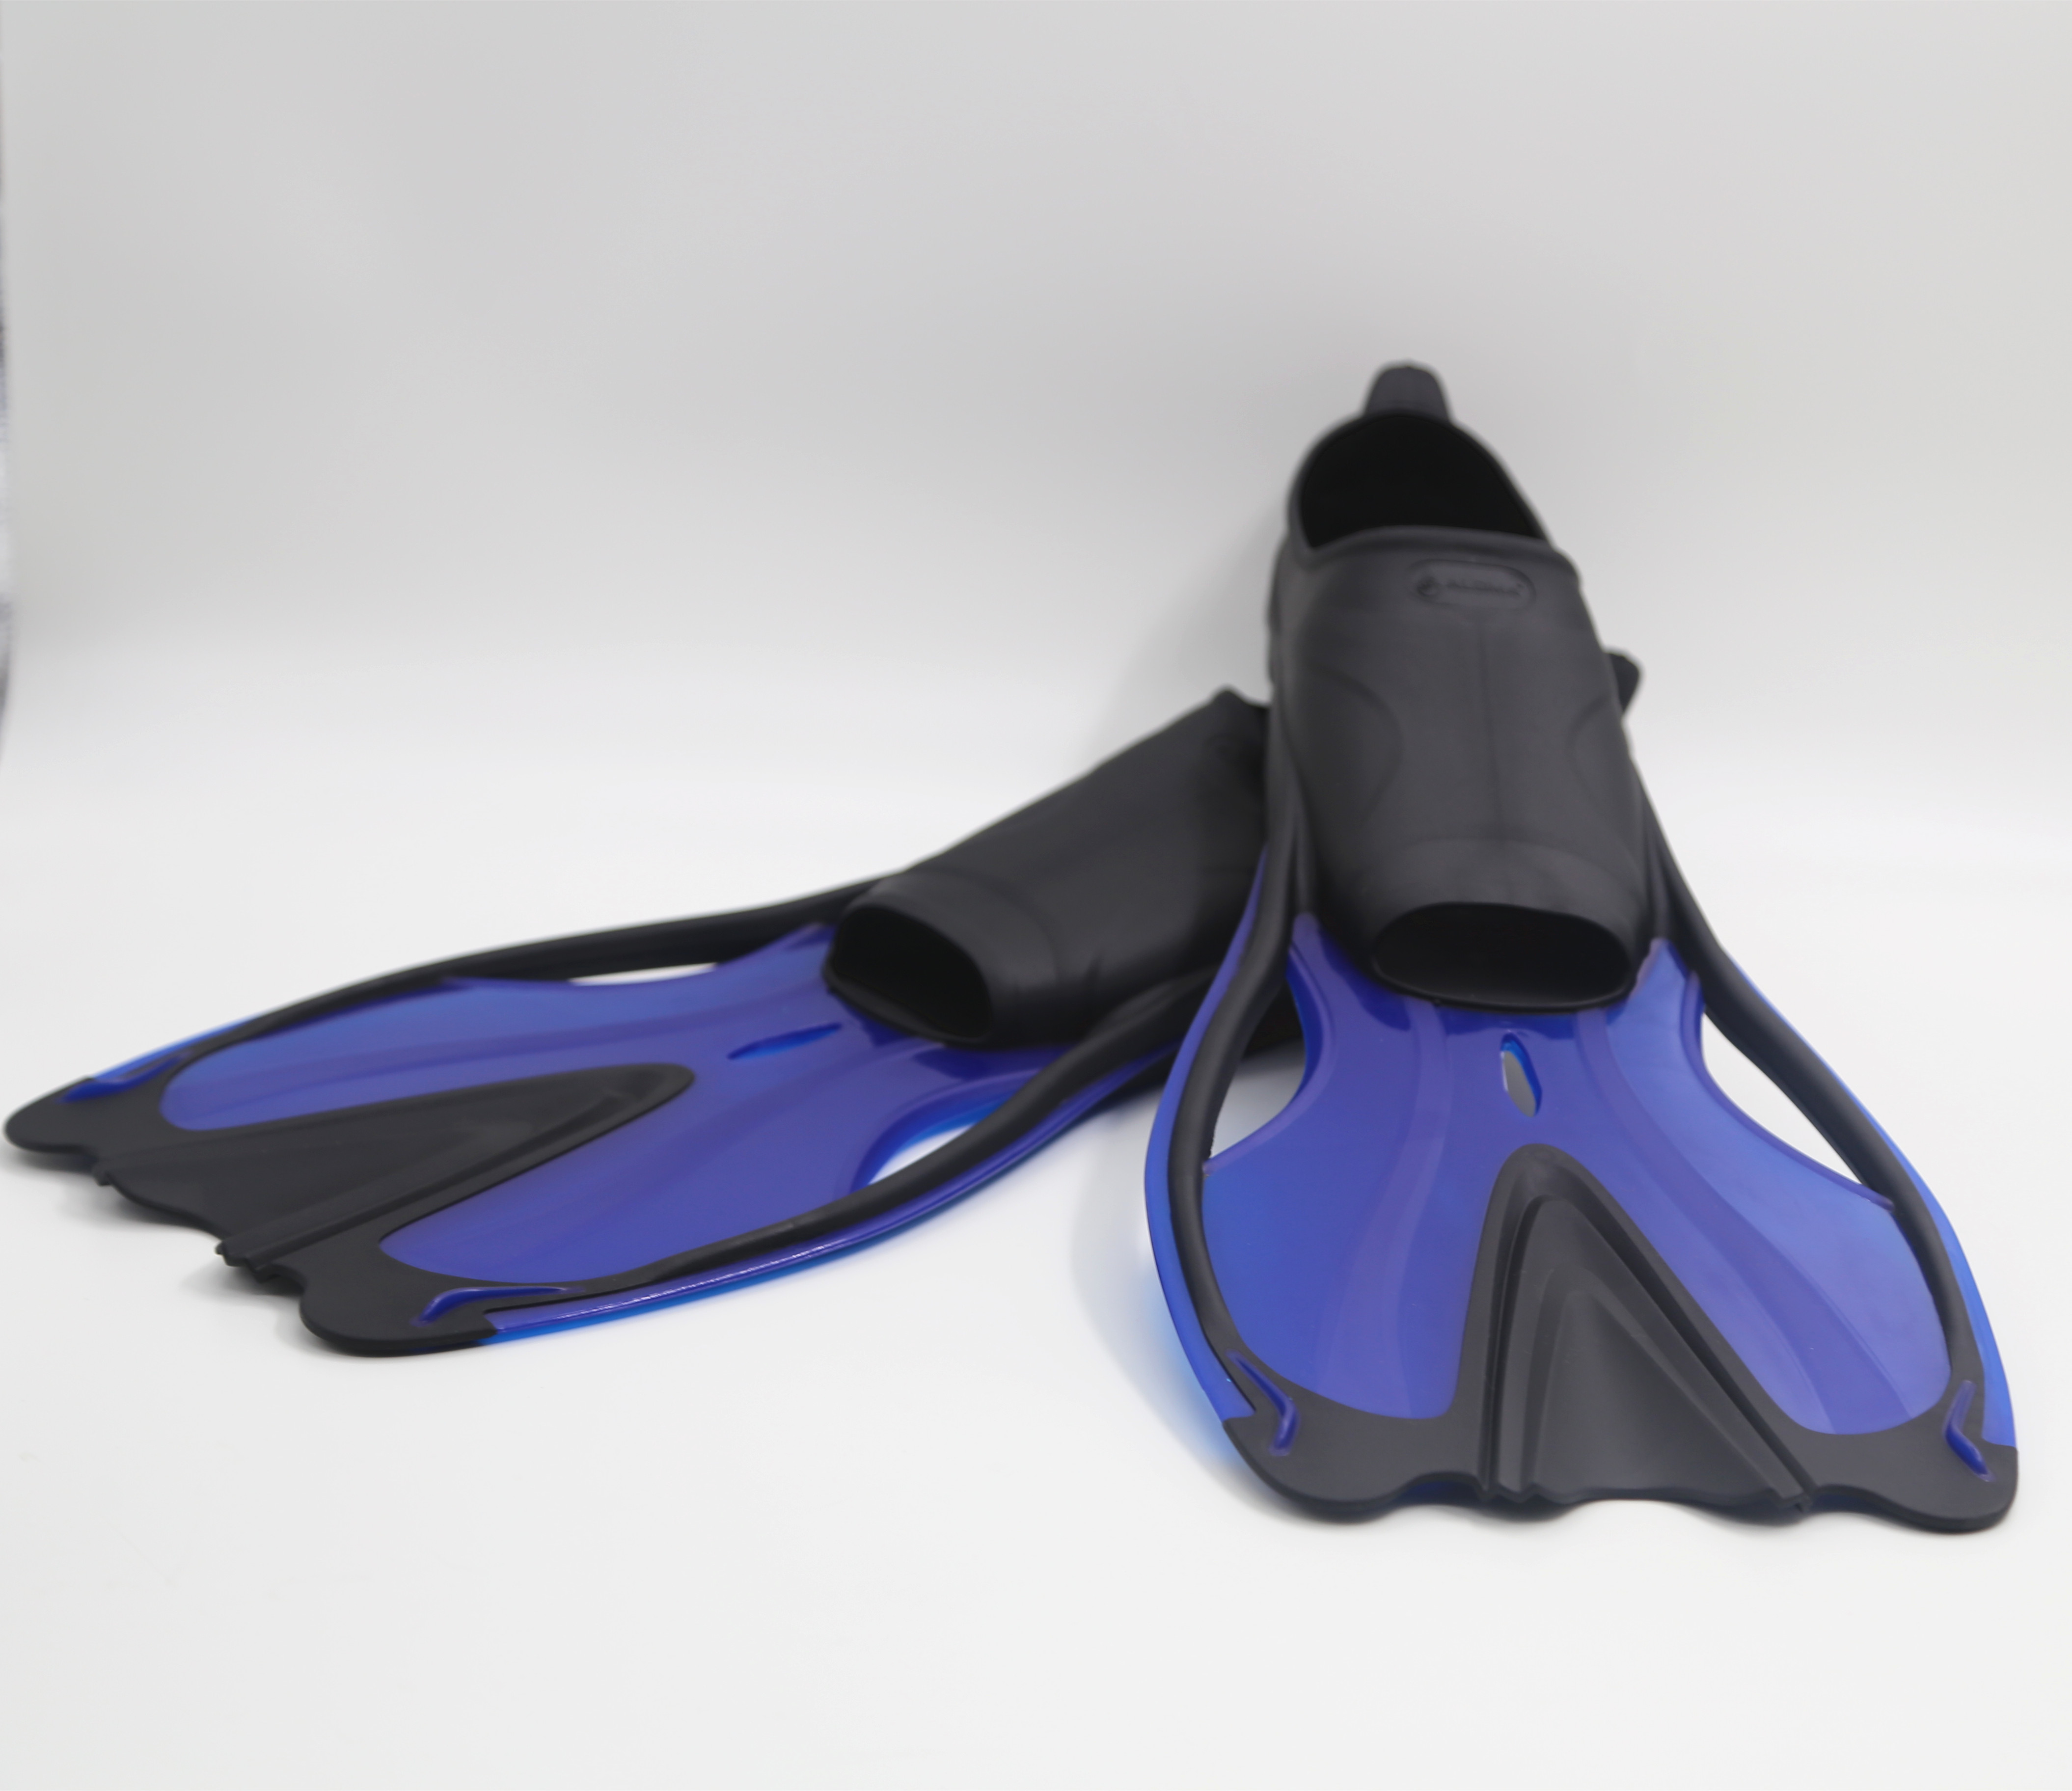 Diving-Fins-Swim-Footsteps-Silicone-Snorkeling-Diving-Swimming-Sports-Equipment-Long-Fins-1138058-5